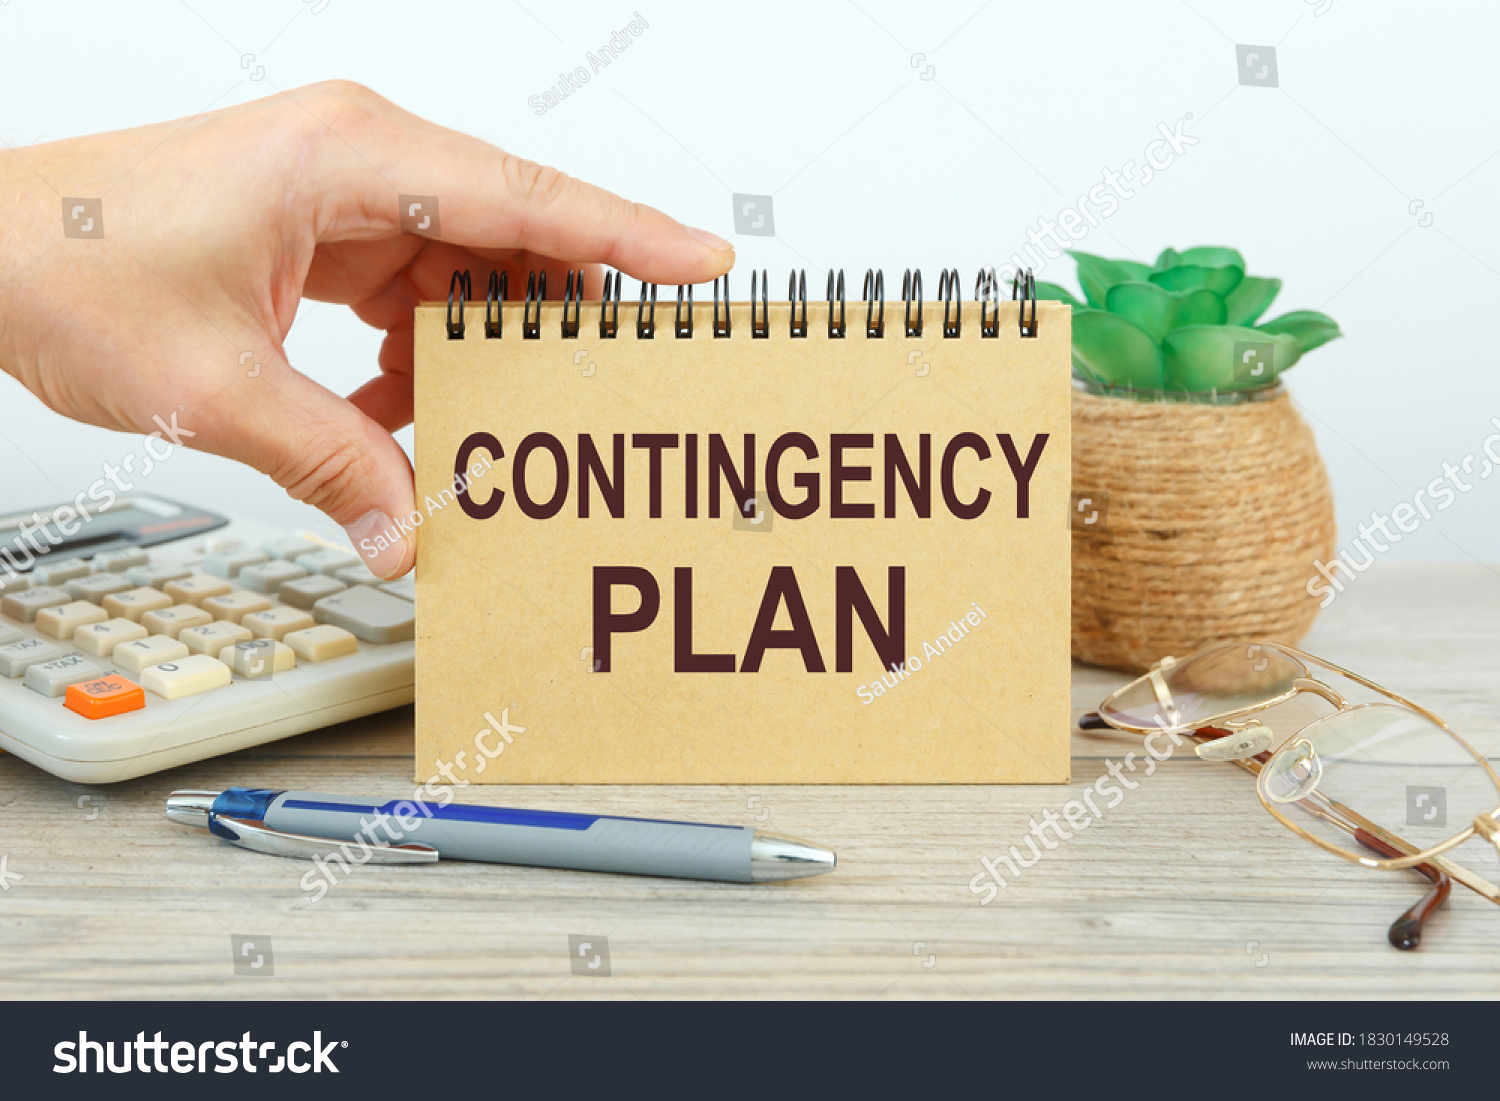 Notepad with text Contingency Plan on a white background, near calculator and office supplies. Business concept. #1830149528